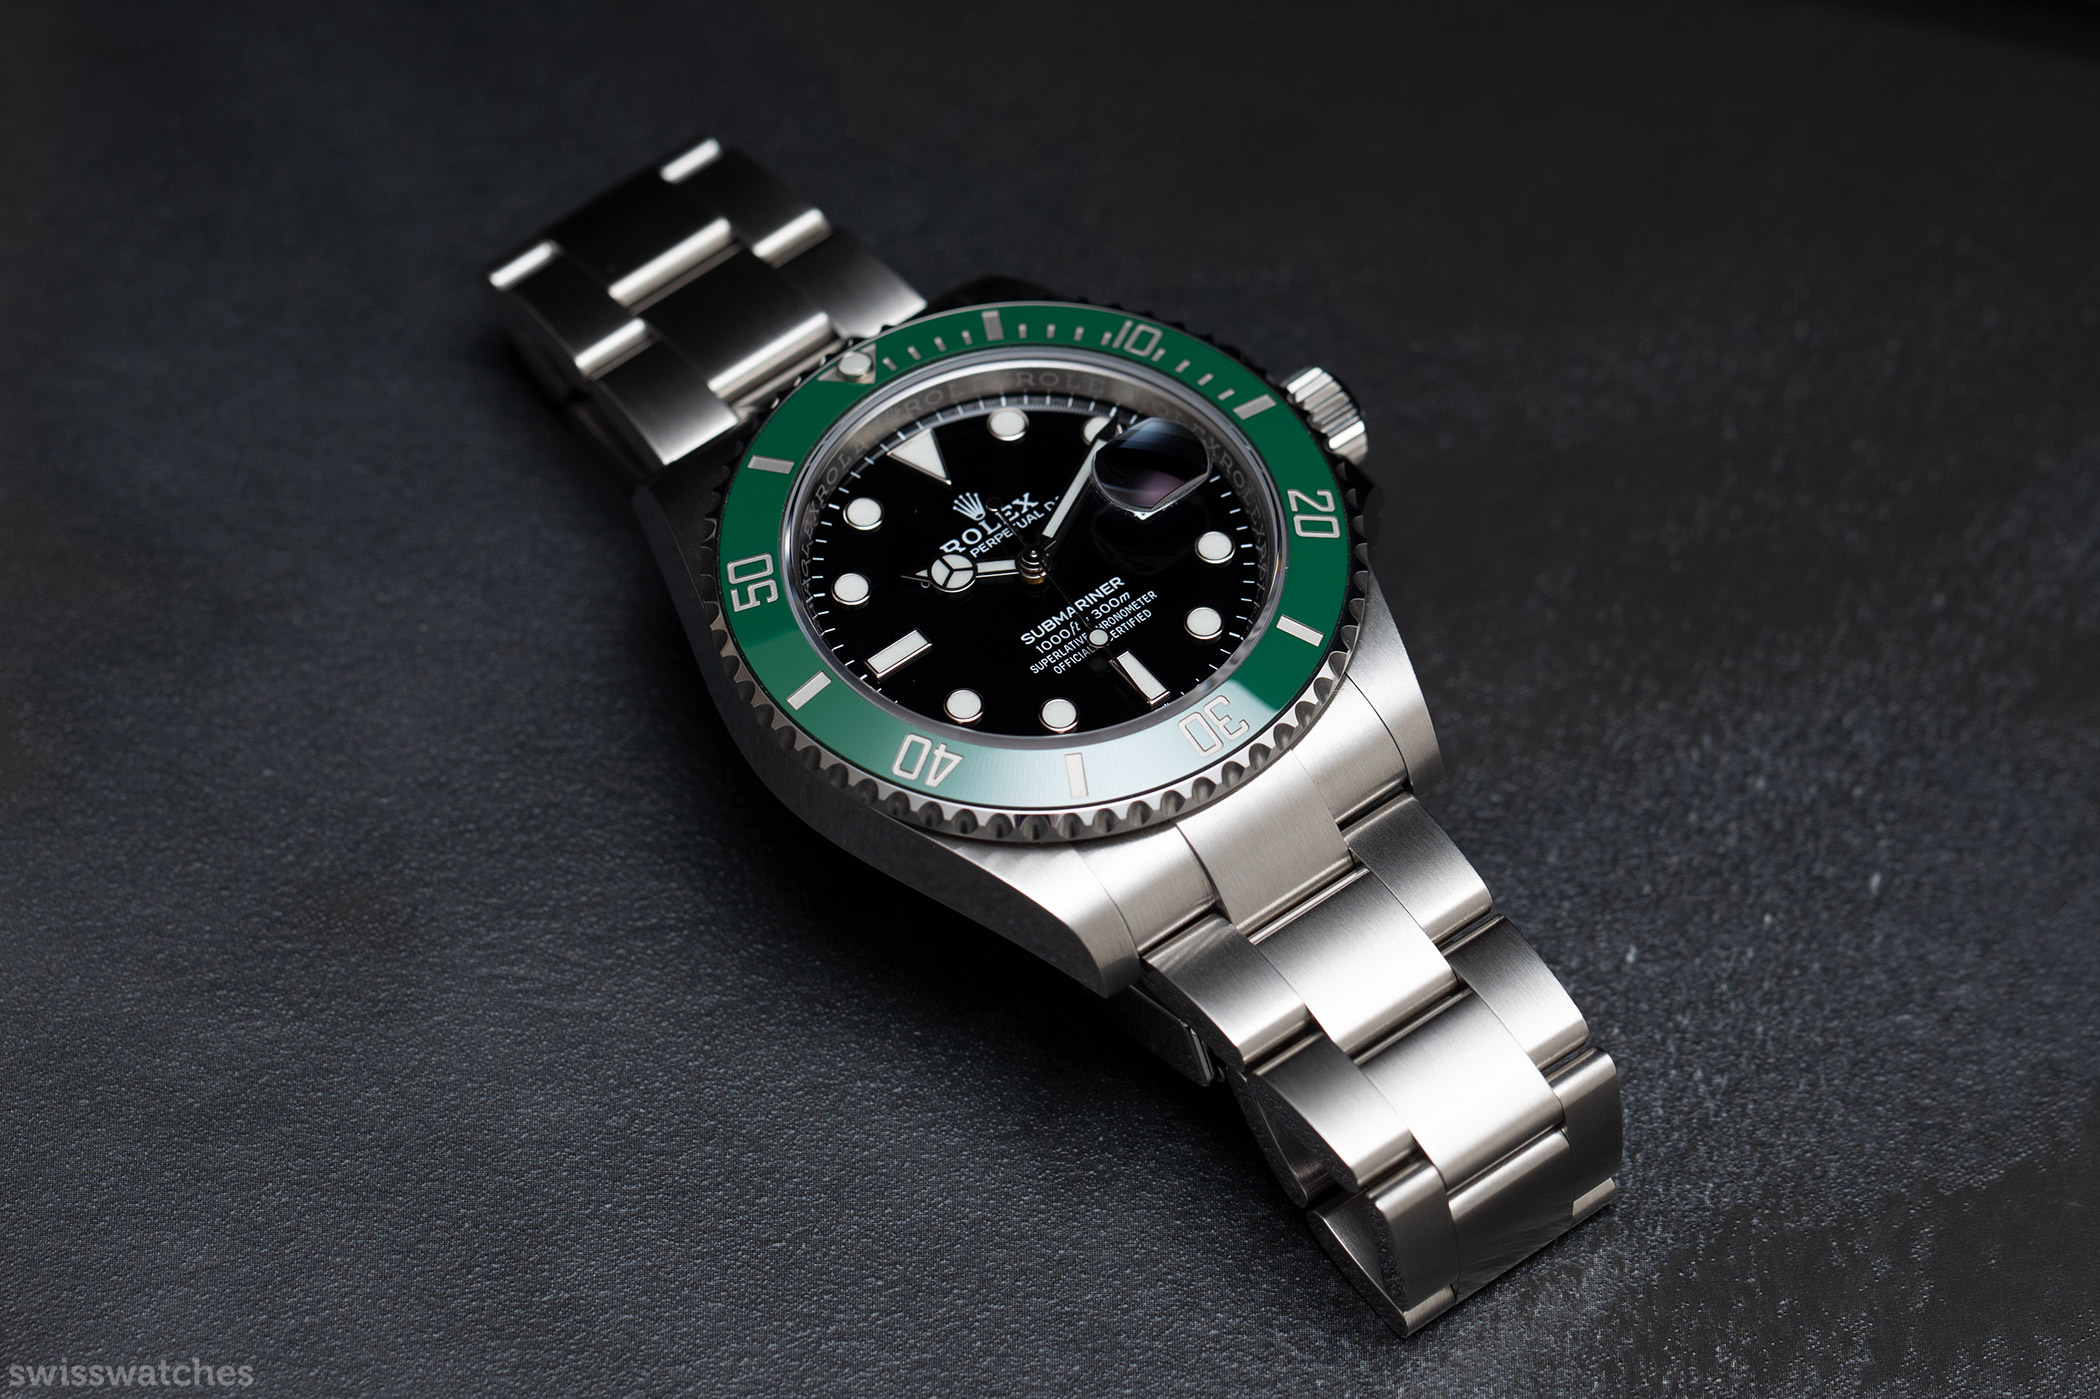 Rolex Submariner: Date or No Date – The Ultimate Question